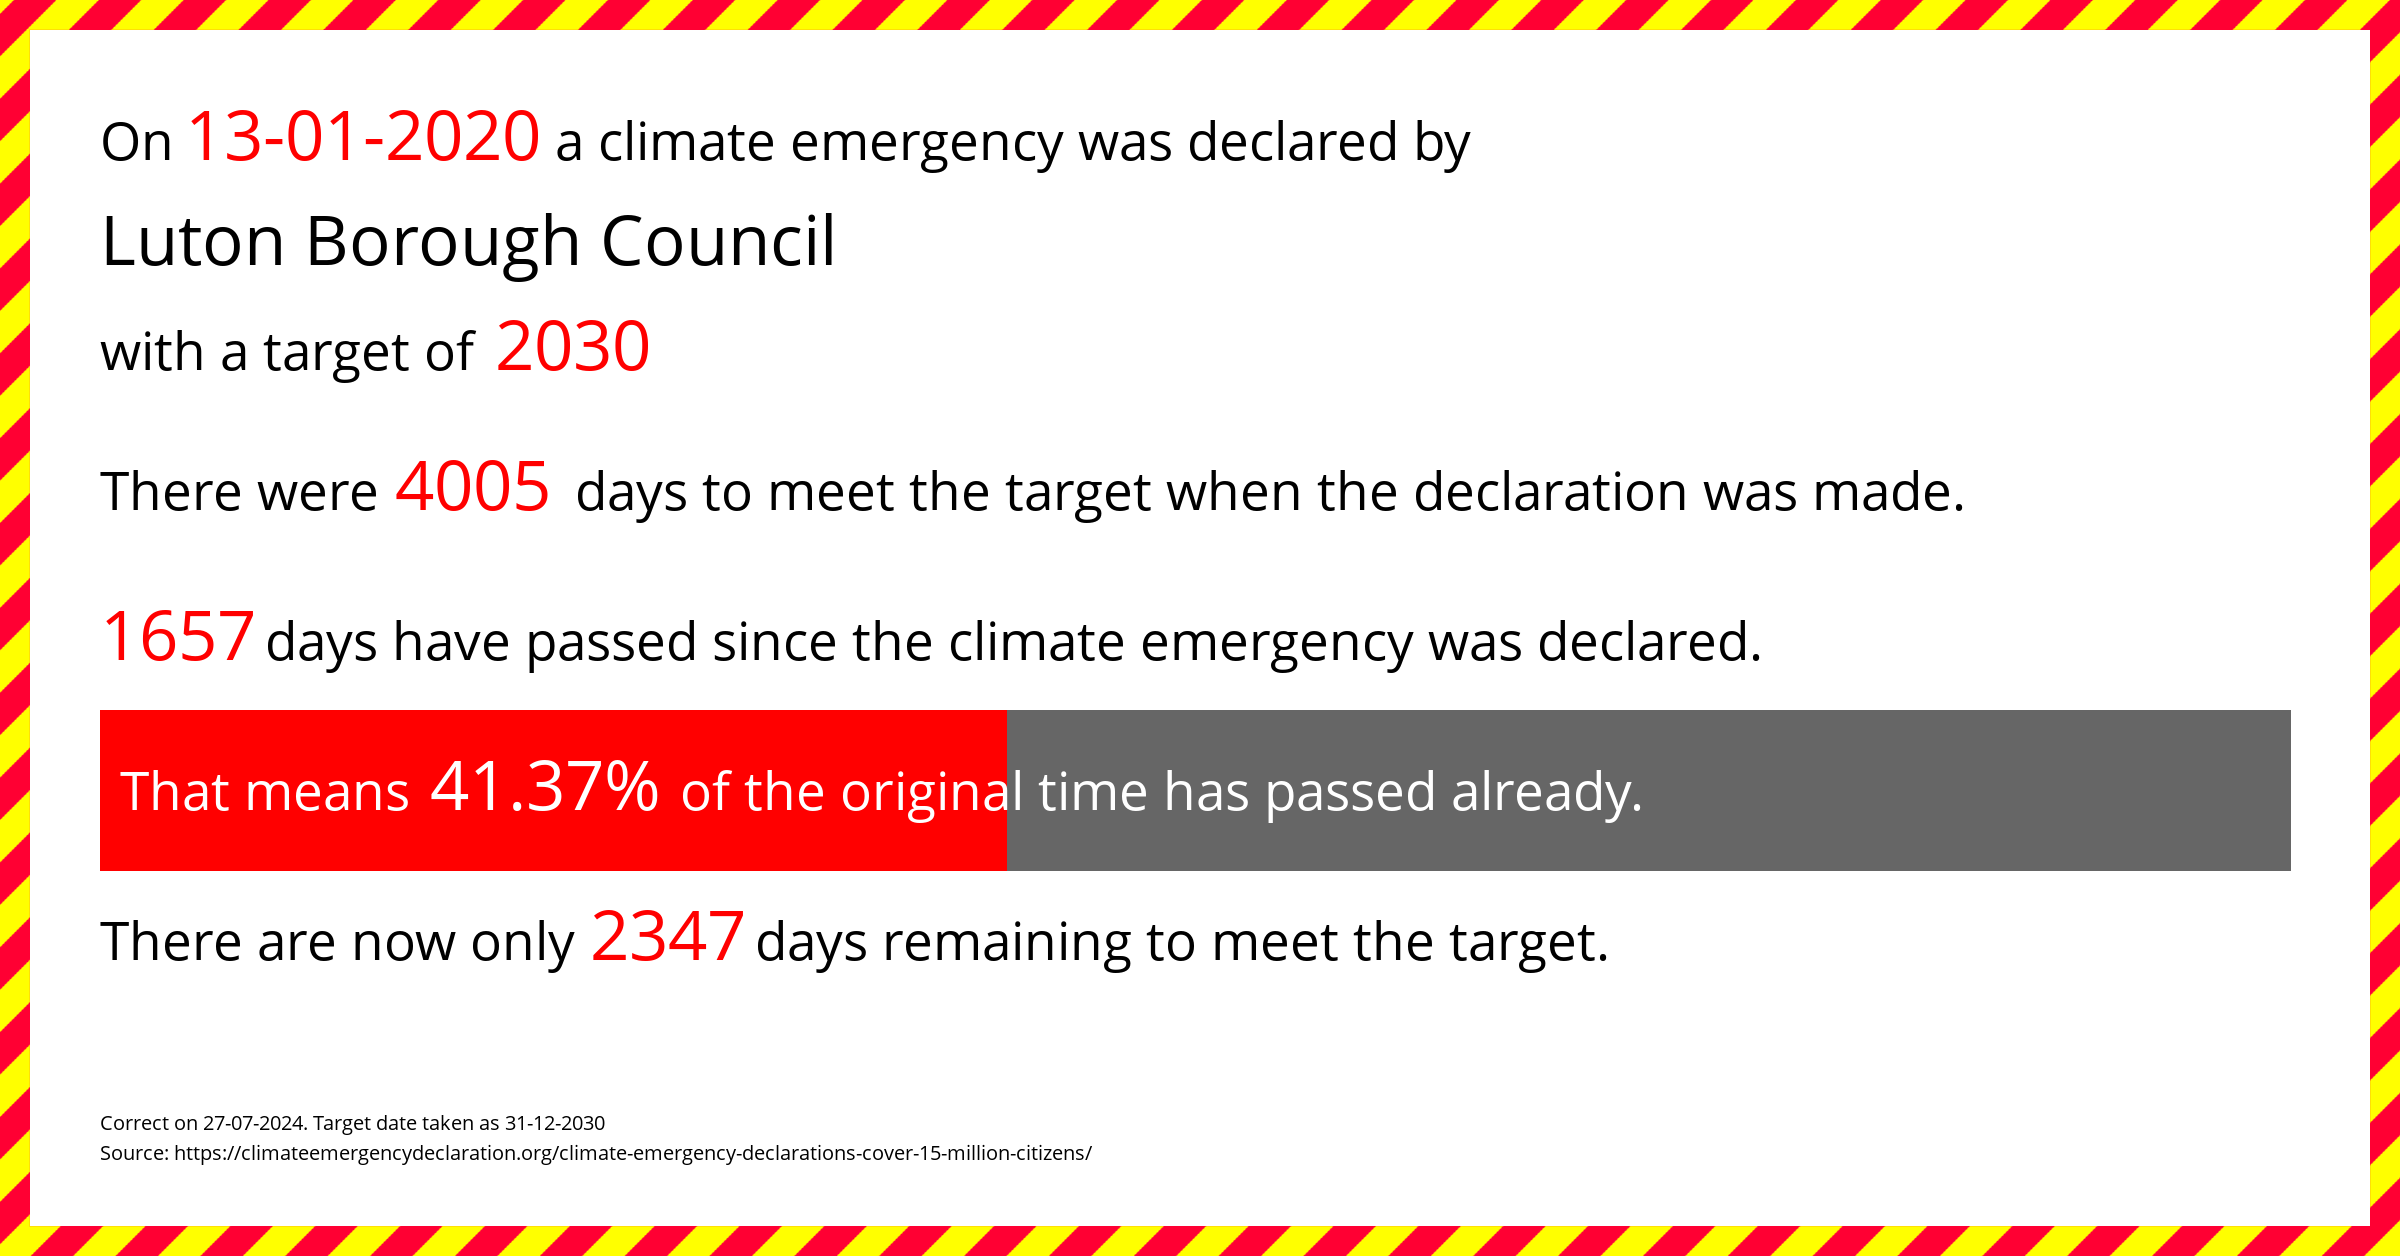 Luton Borough Council declared a Climate emergency on Monday 13th January 2020, with a target of 2030.